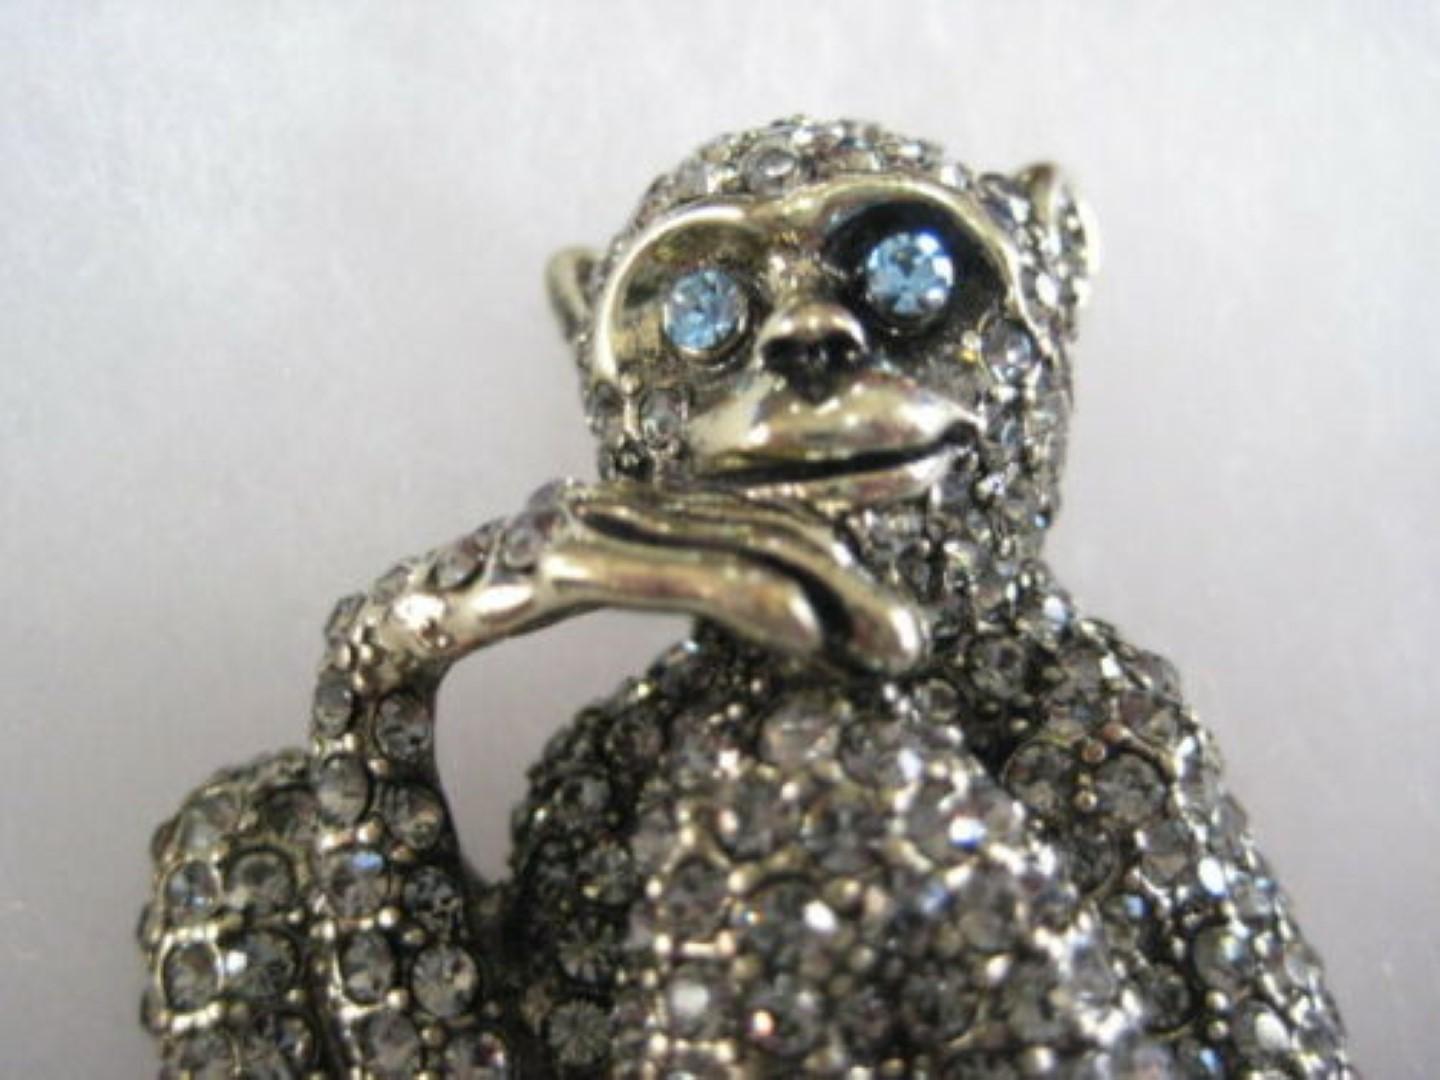 Chic and Whimsical Monkey design brooch encrusted with  pave-set sparkling crystals. Beautifully detailed as the Monkey sits in The Thinker pose and ponders about life atop his gorgeous Aquamarine crystal perch! Approx. size: 3.25